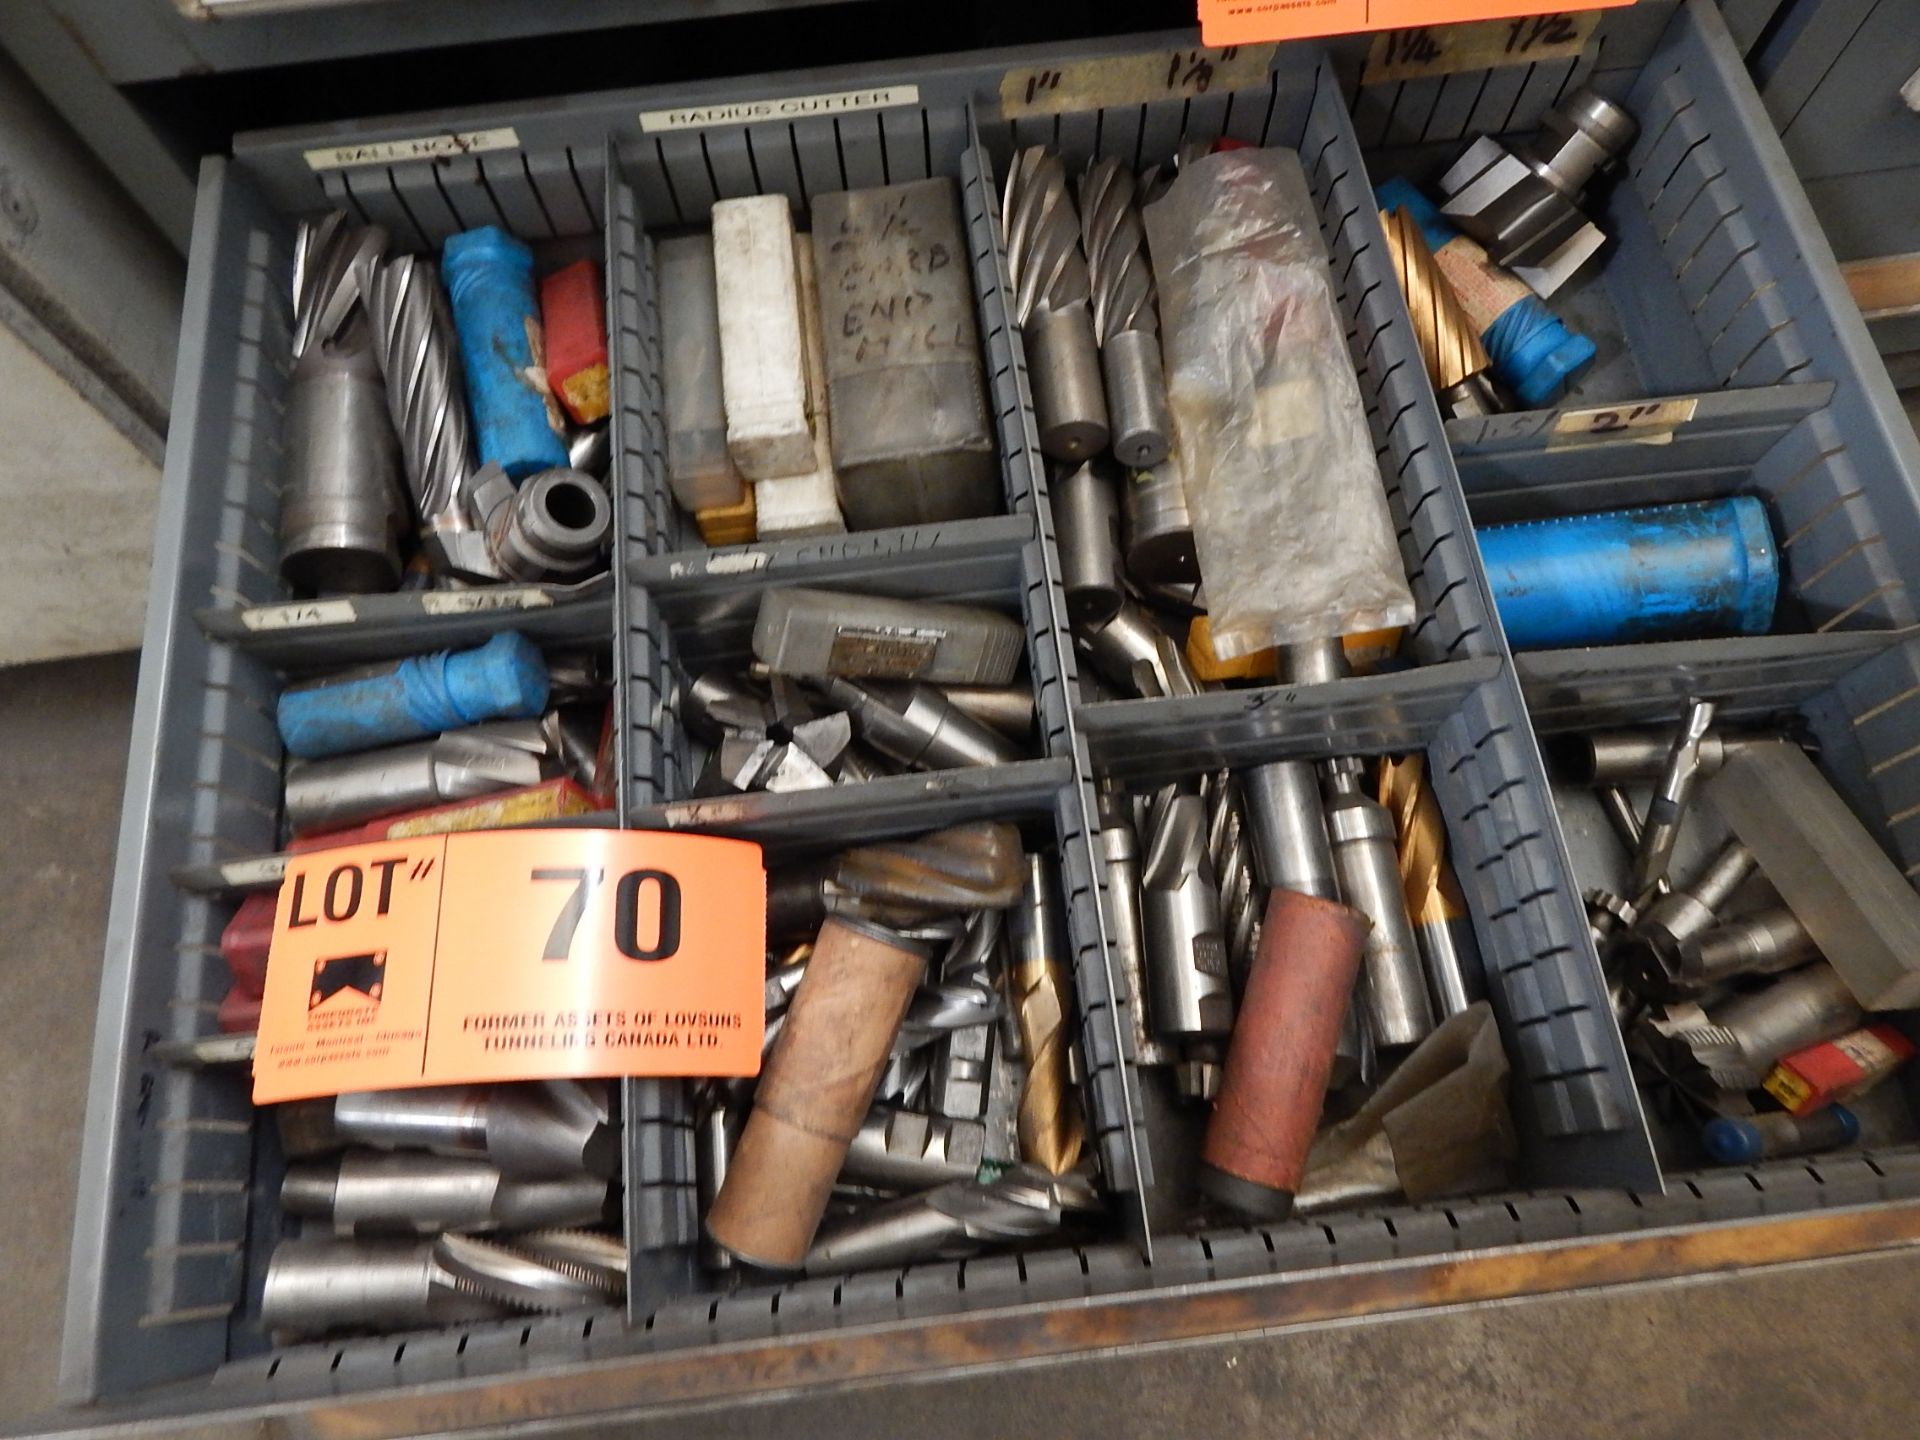 LOT/ CONTENTS OF DRAWER CONSISTING OF ENDMILLS